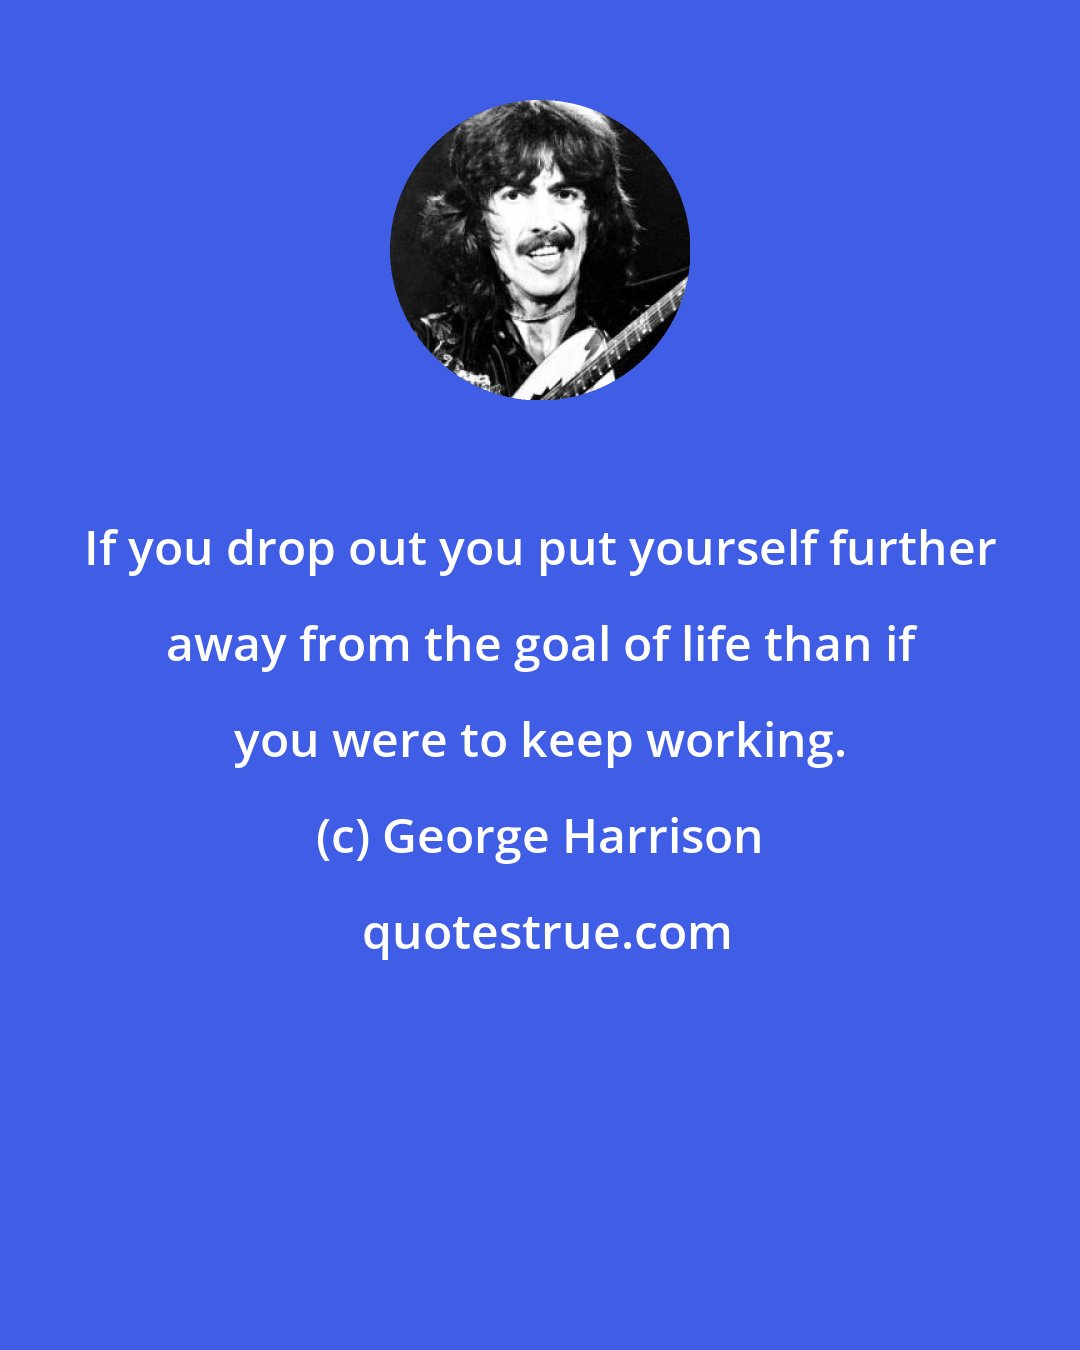 George Harrison: If you drop out you put yourself further away from the goal of life than if you were to keep working.